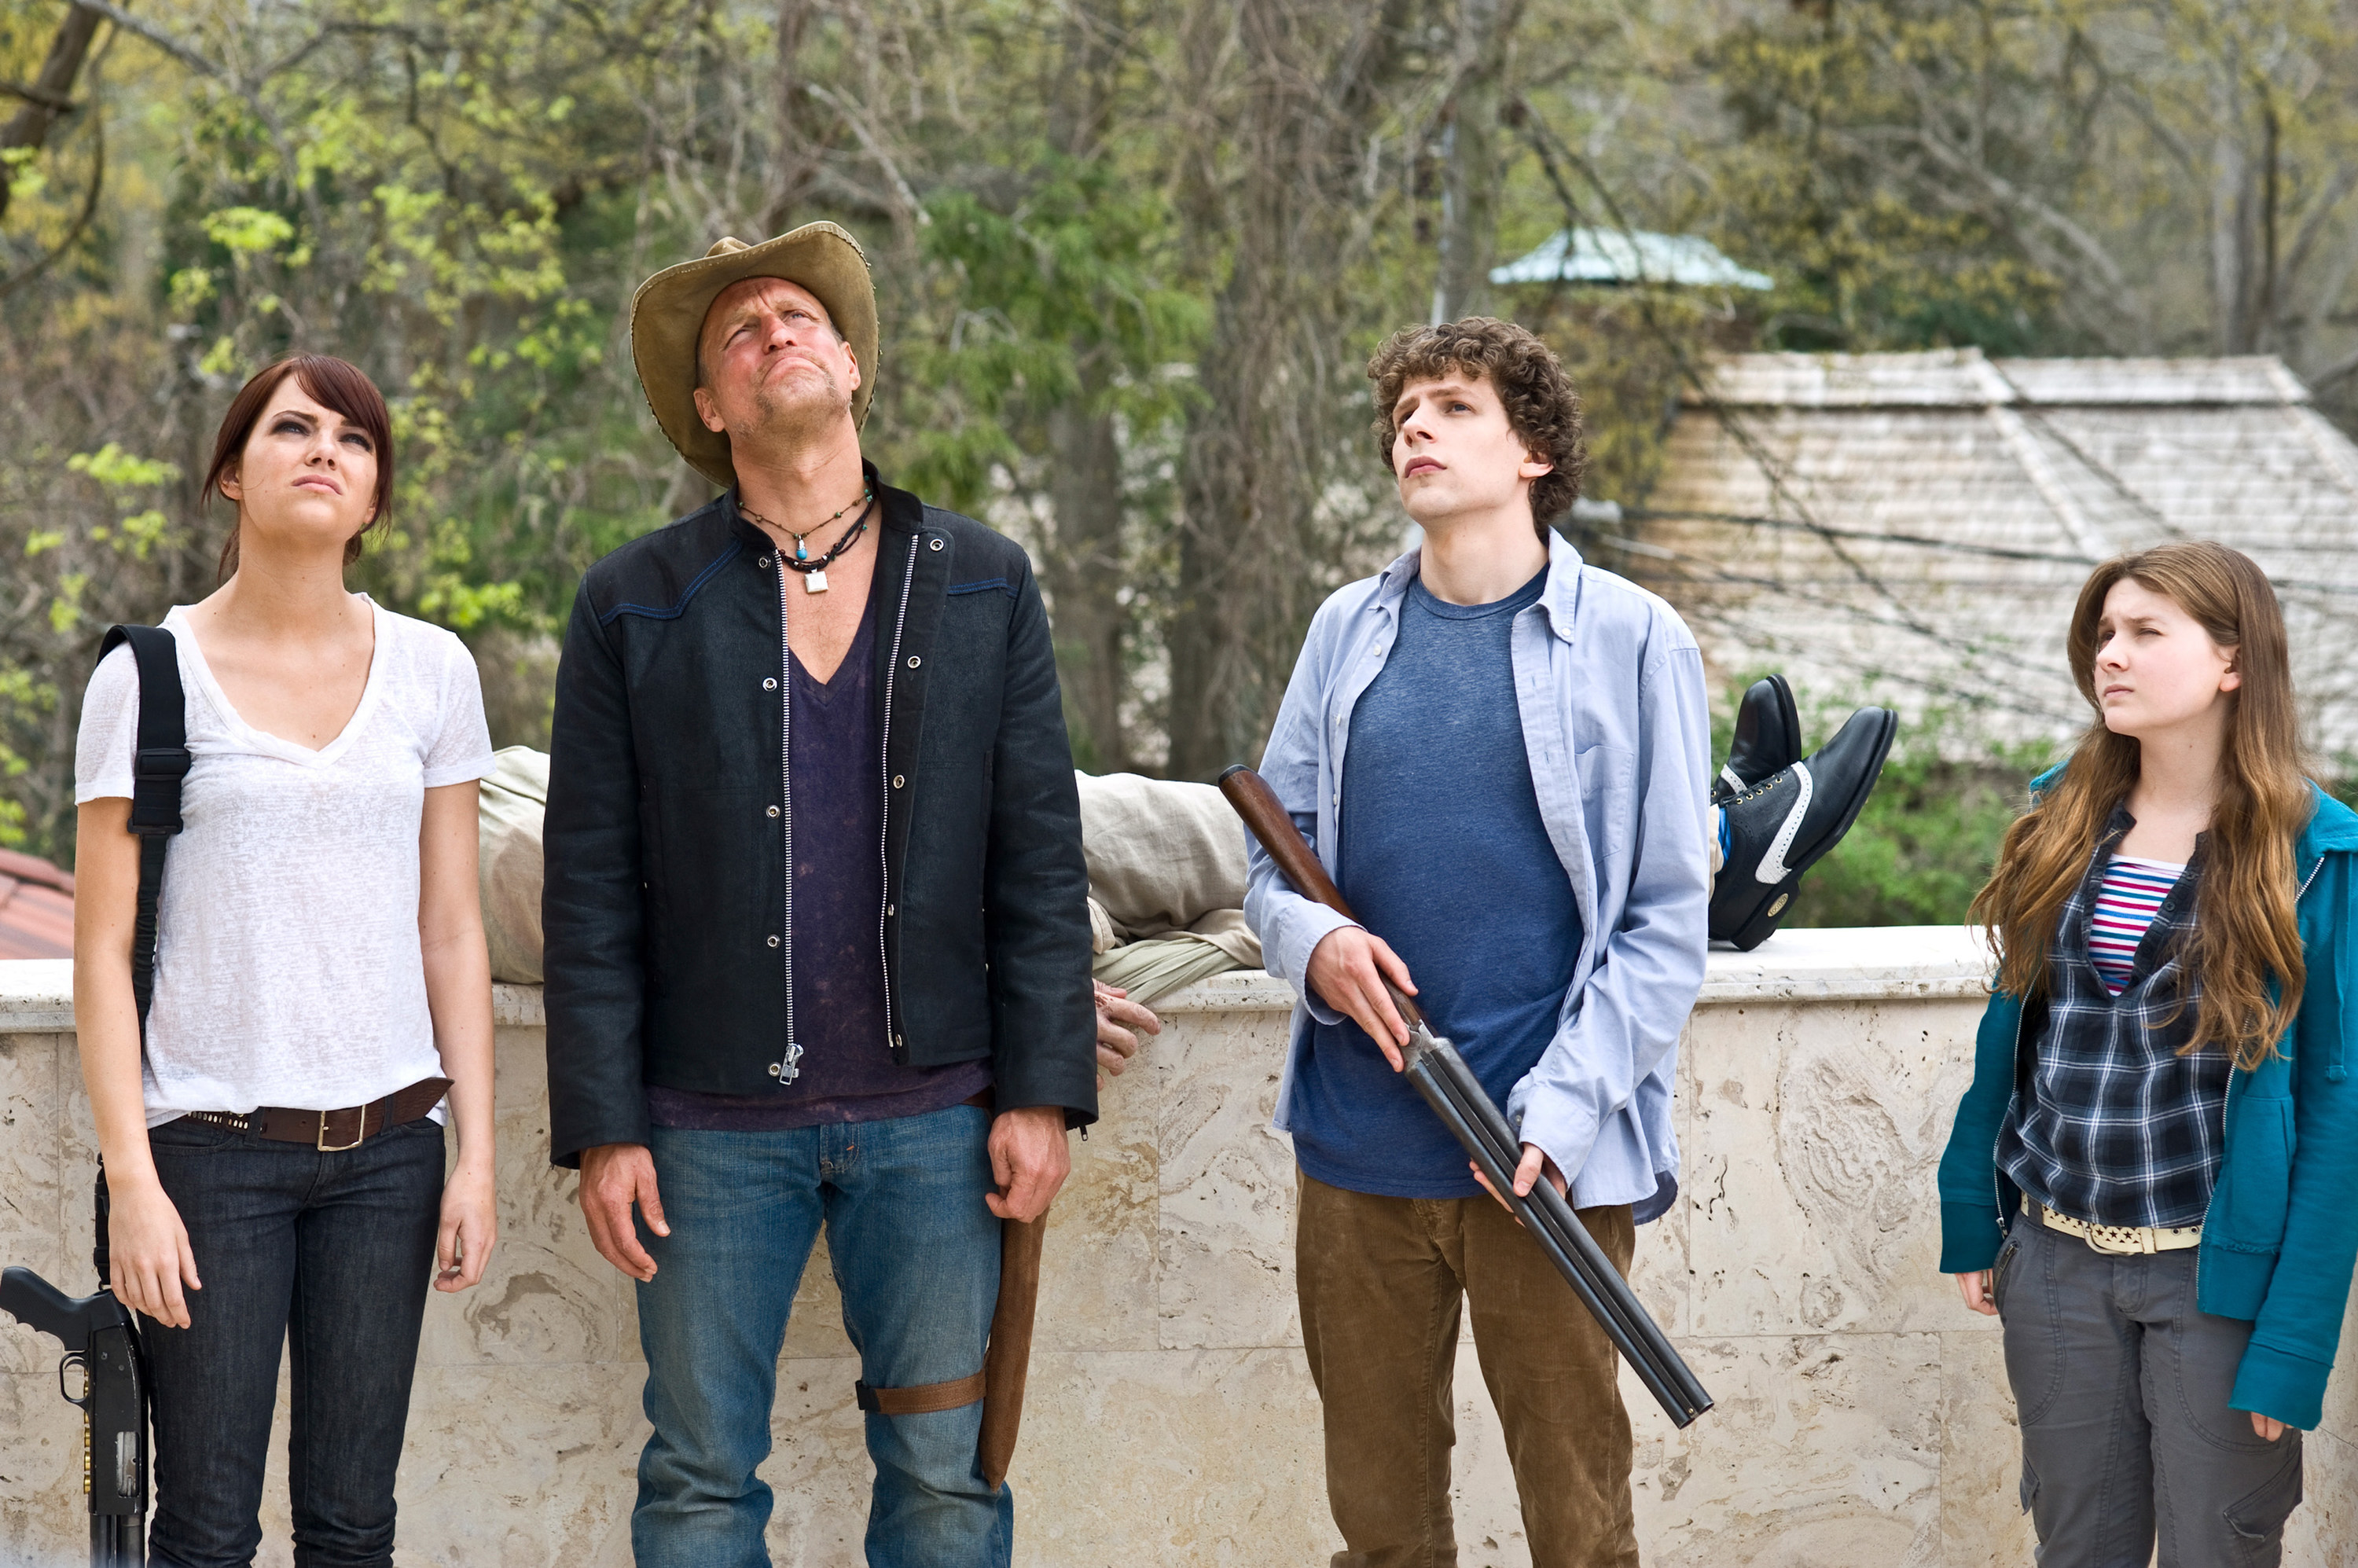 Emma Stone, Woody Harrelson, Jesse Eisenberg, and Abigail Breslin look into the sky with guns